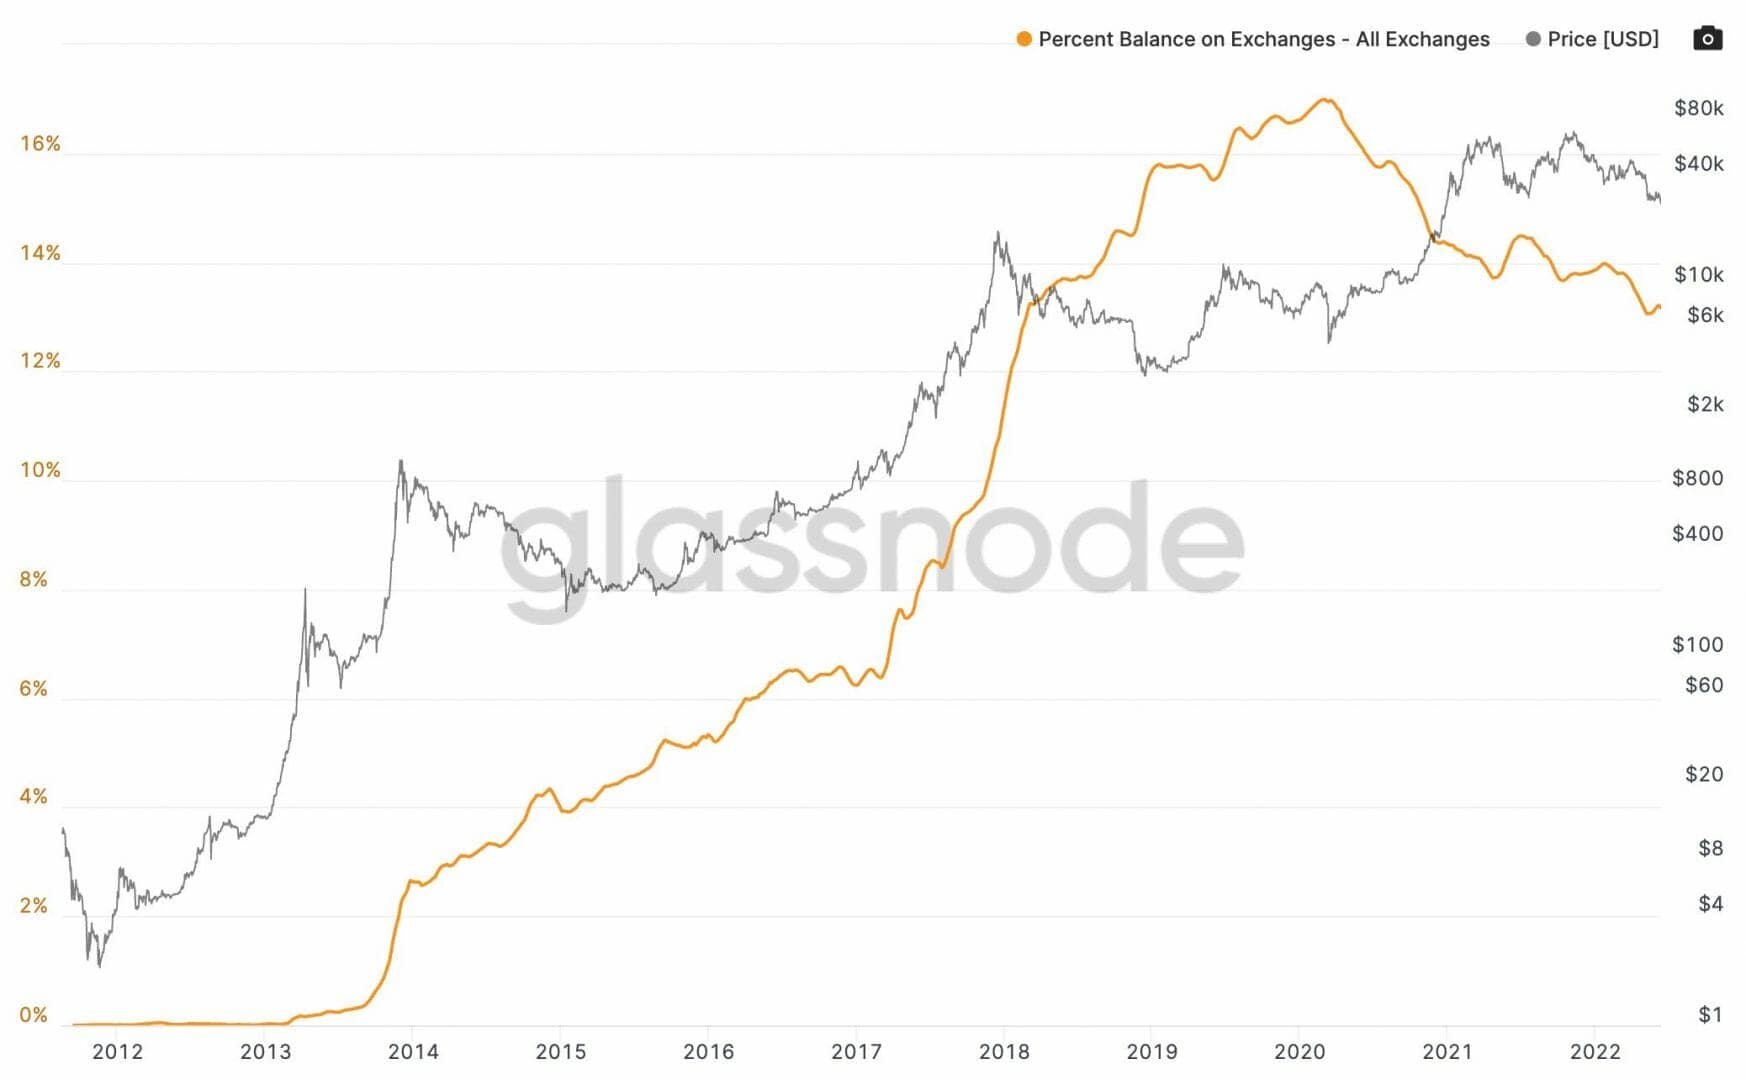 The downward trend continues in the amount of Bitcoin available on trading platforms.